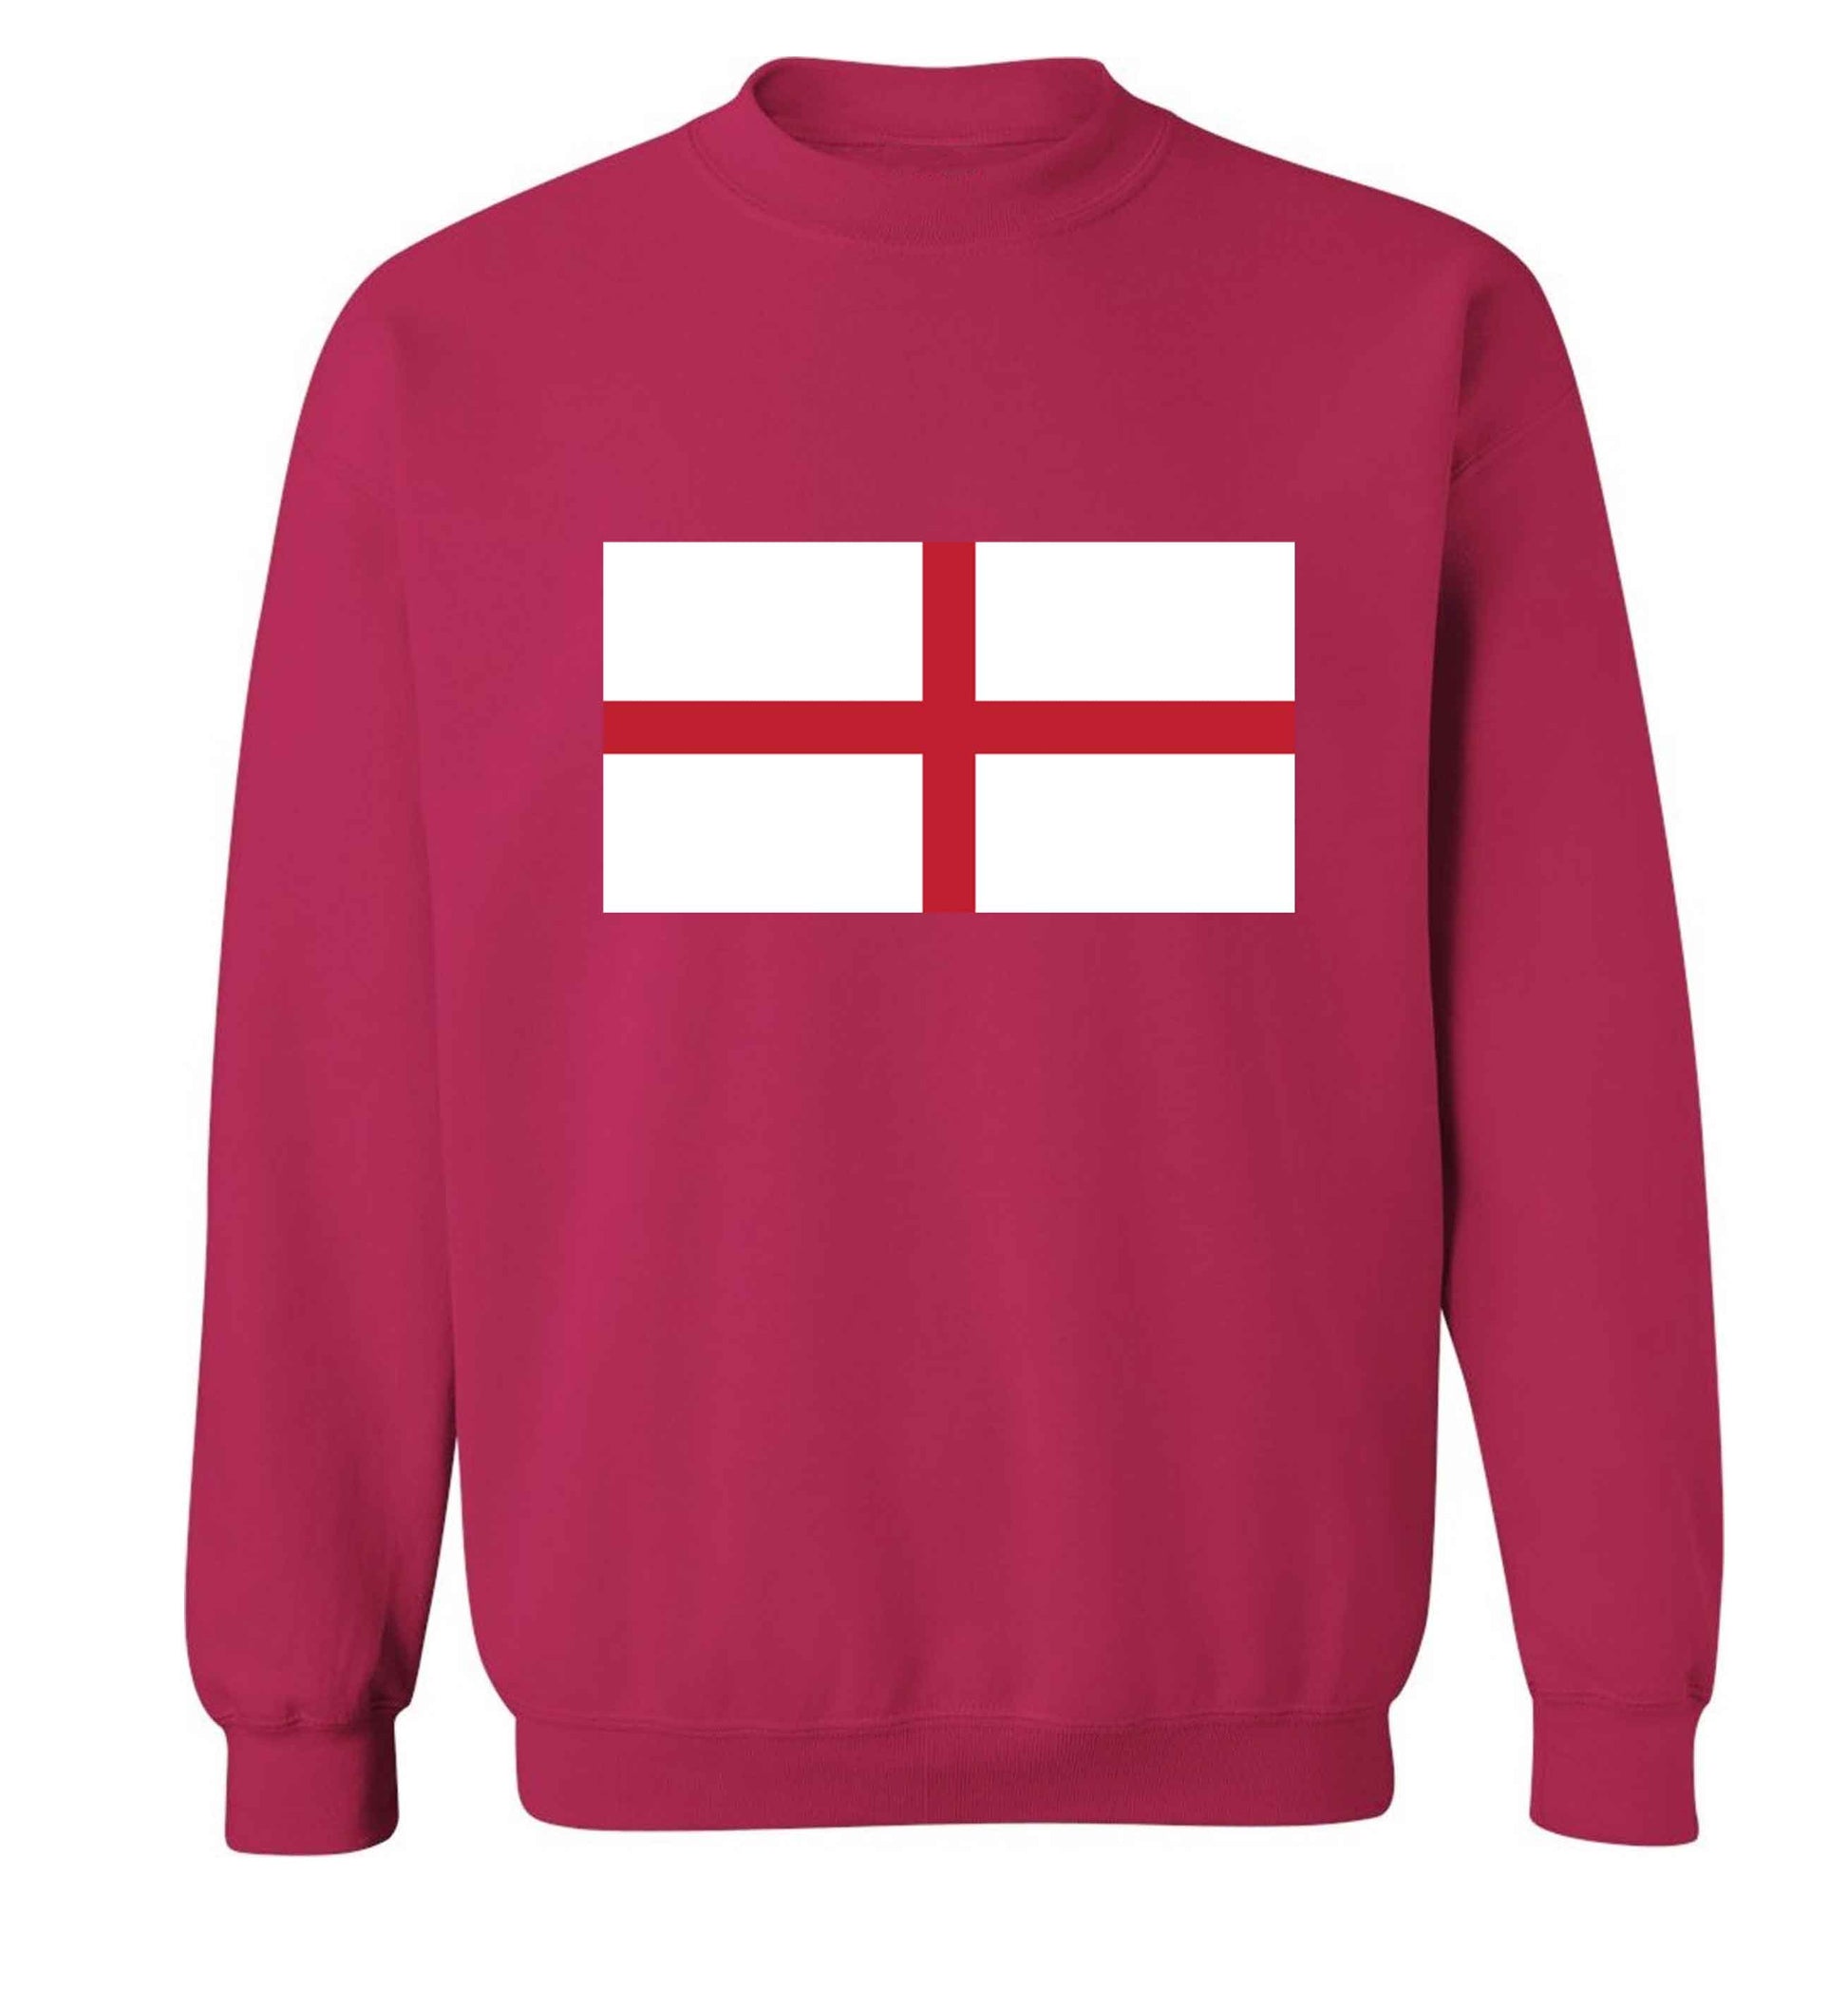 England Flag adult's unisex pink sweater 2XL